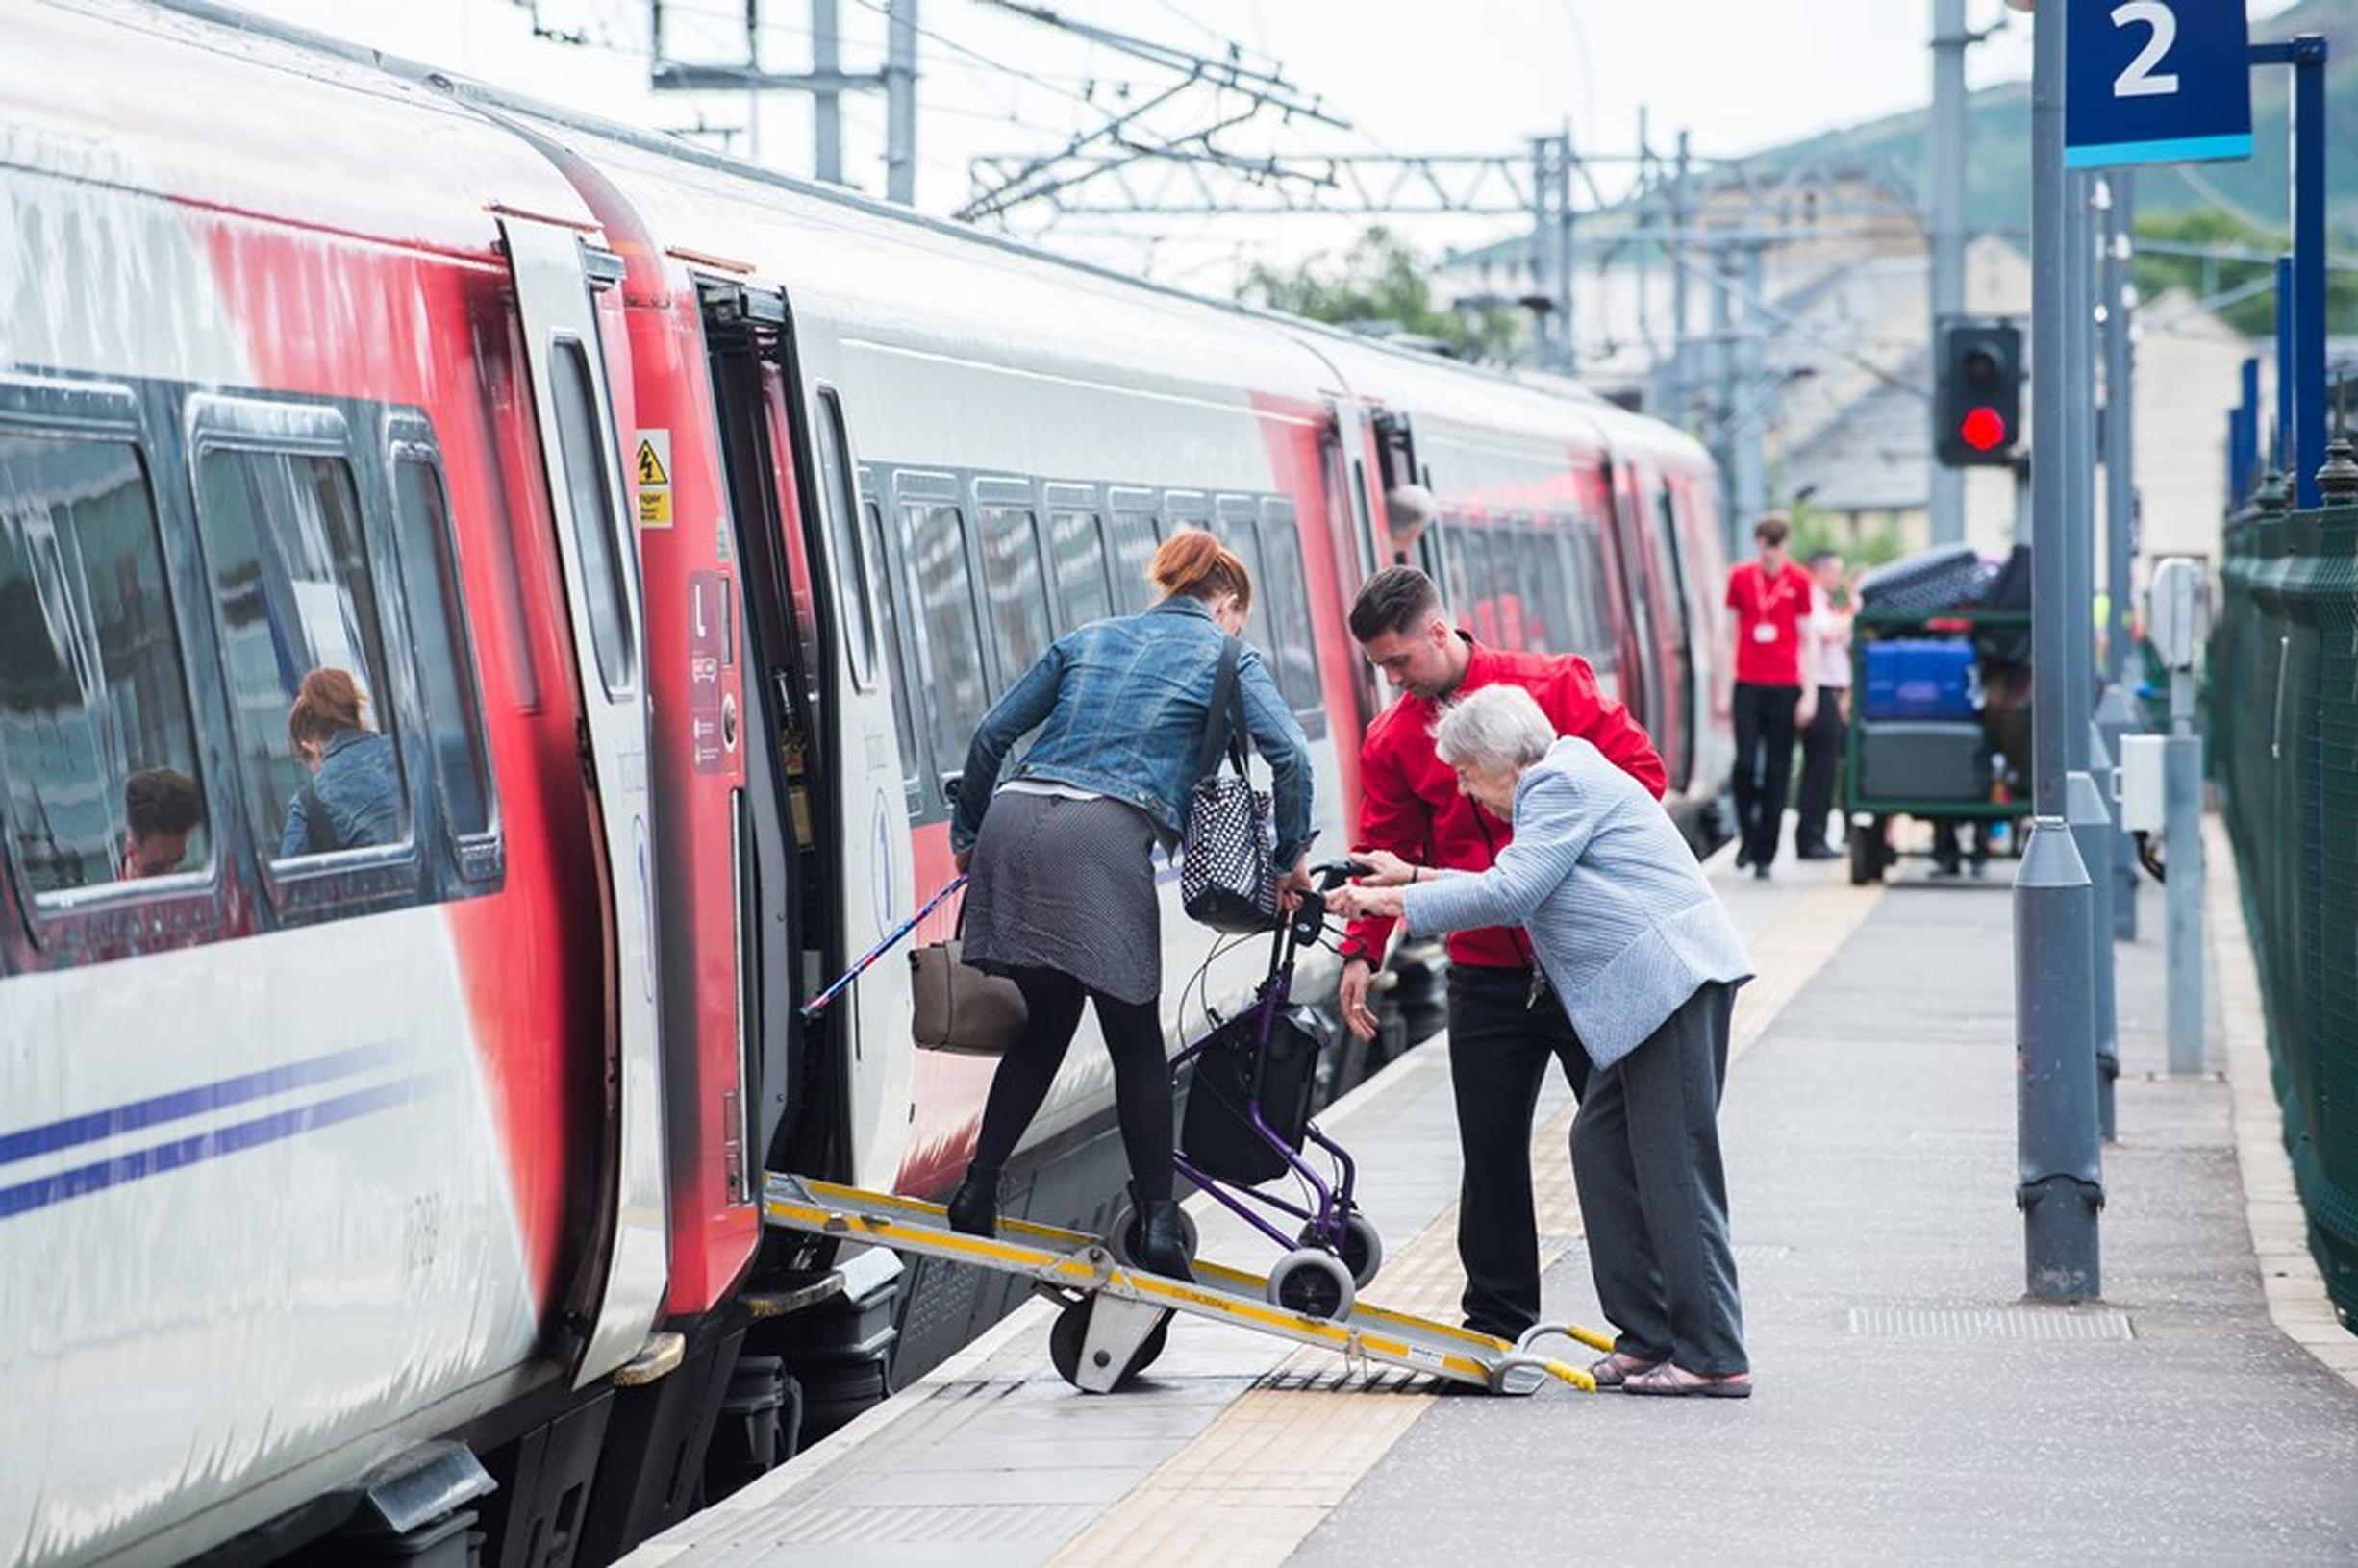 Network Rail will work with the DfT to make station platforms more accessible for disabled people